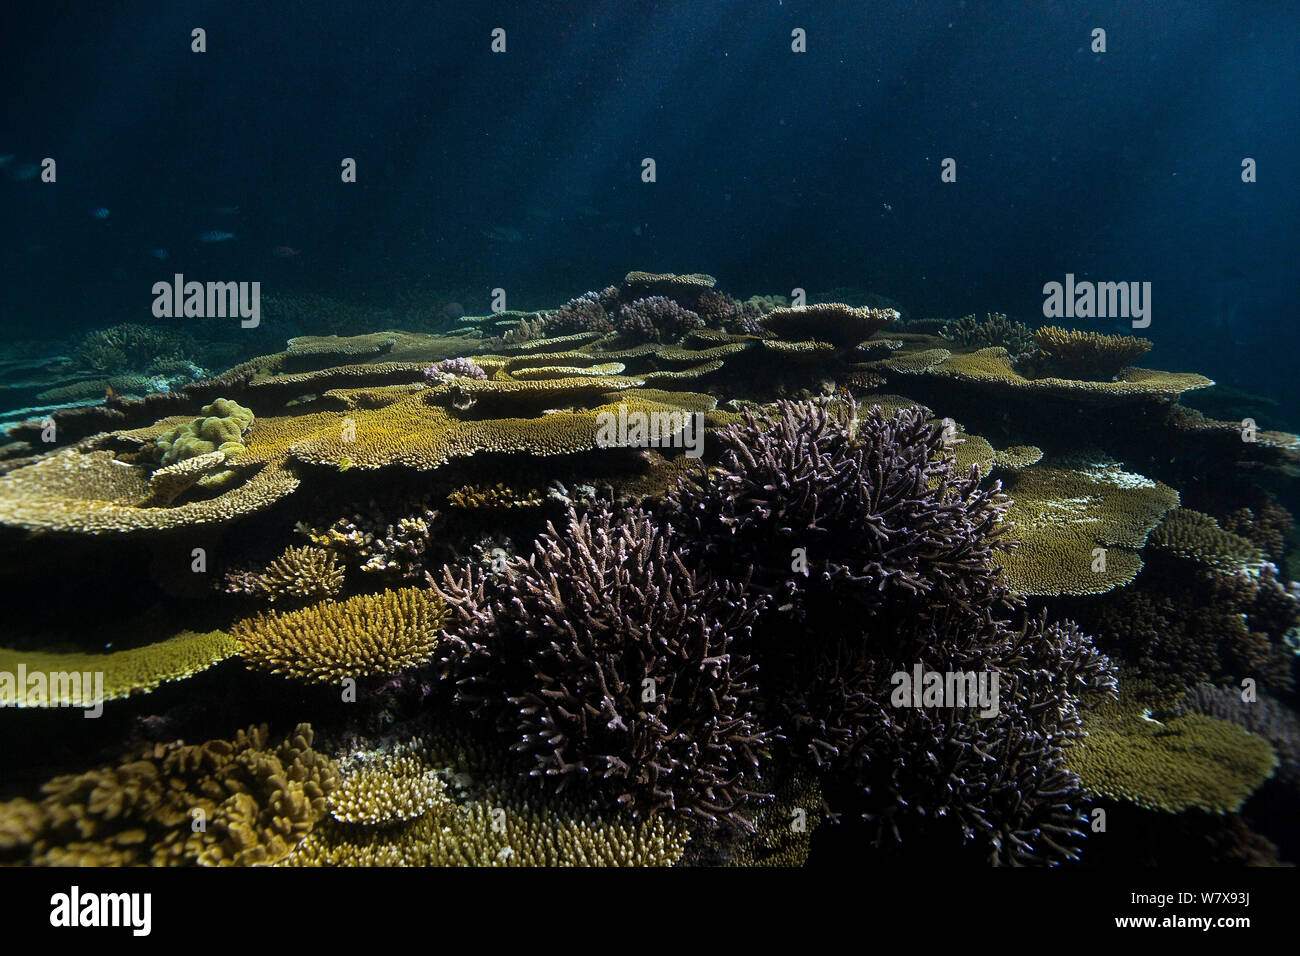 Coral reef with Table corals (Acropora ) at night under the full moon rays,  New Caledonia. Pacific Ocean. Stock Photo